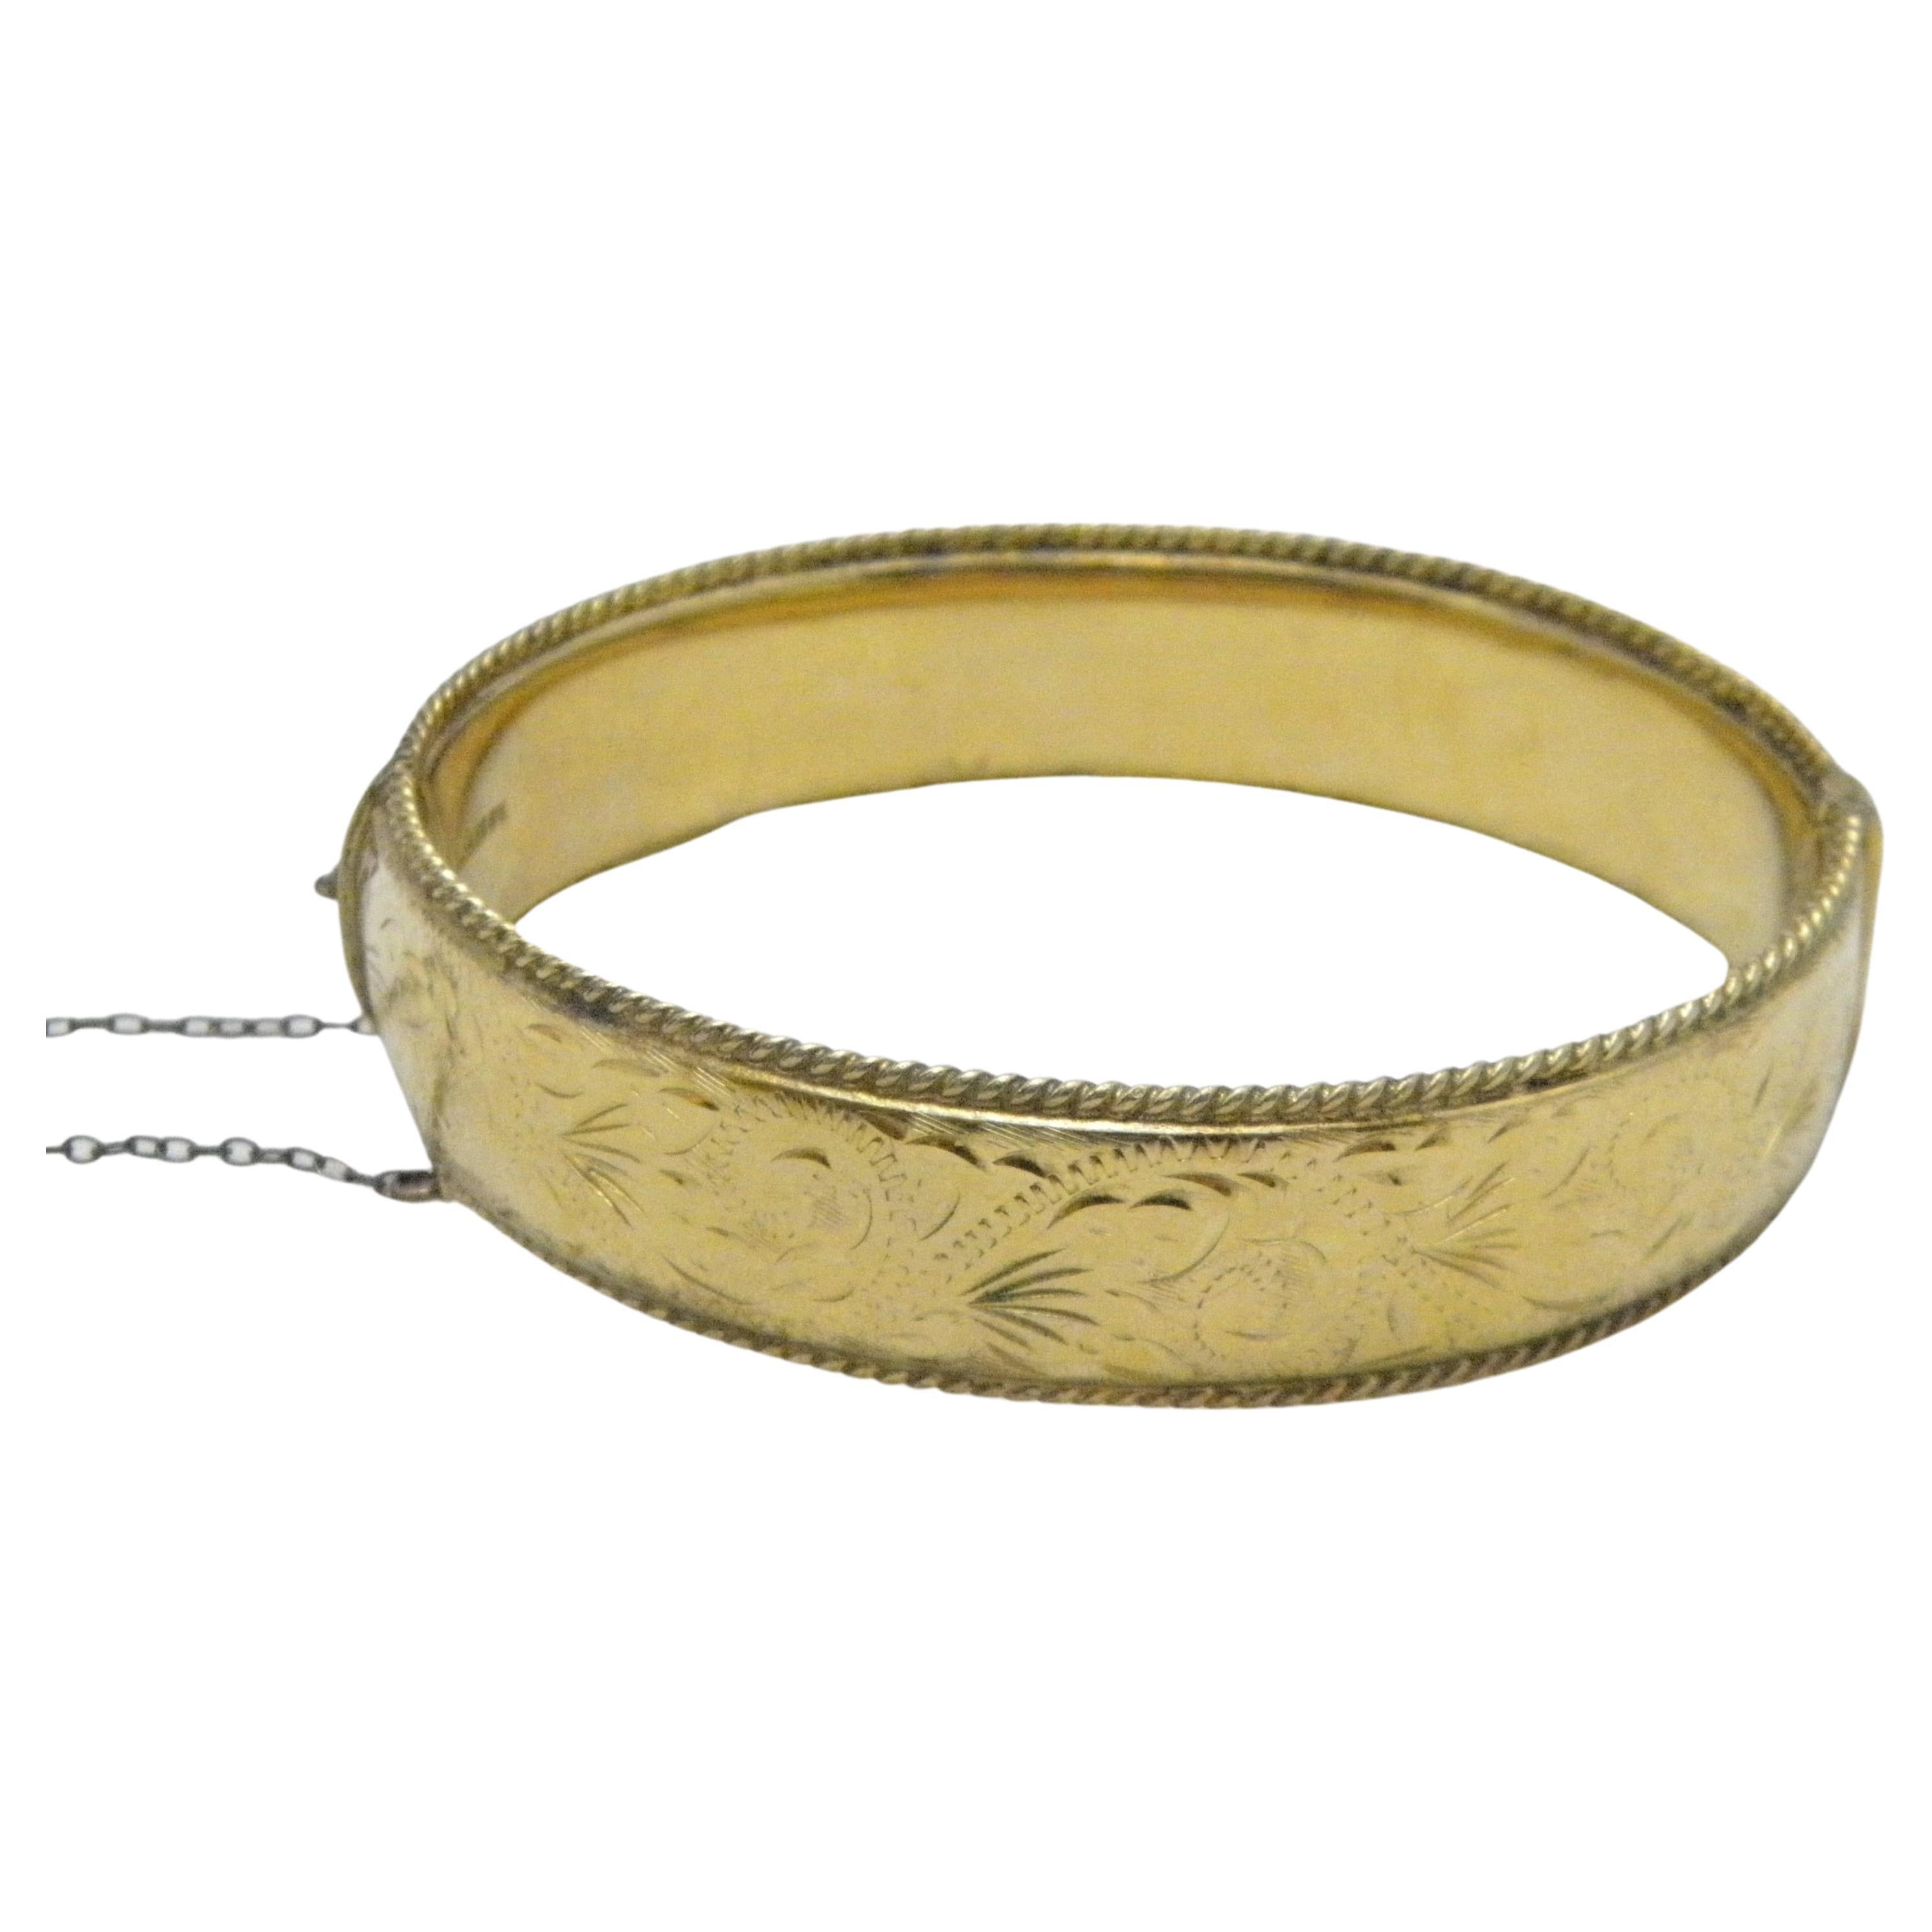 Vintage 9ct Gold 'Rolled' Floral Engraved Cuff Hinged Bracelet Bangle 375 Purity For Sale